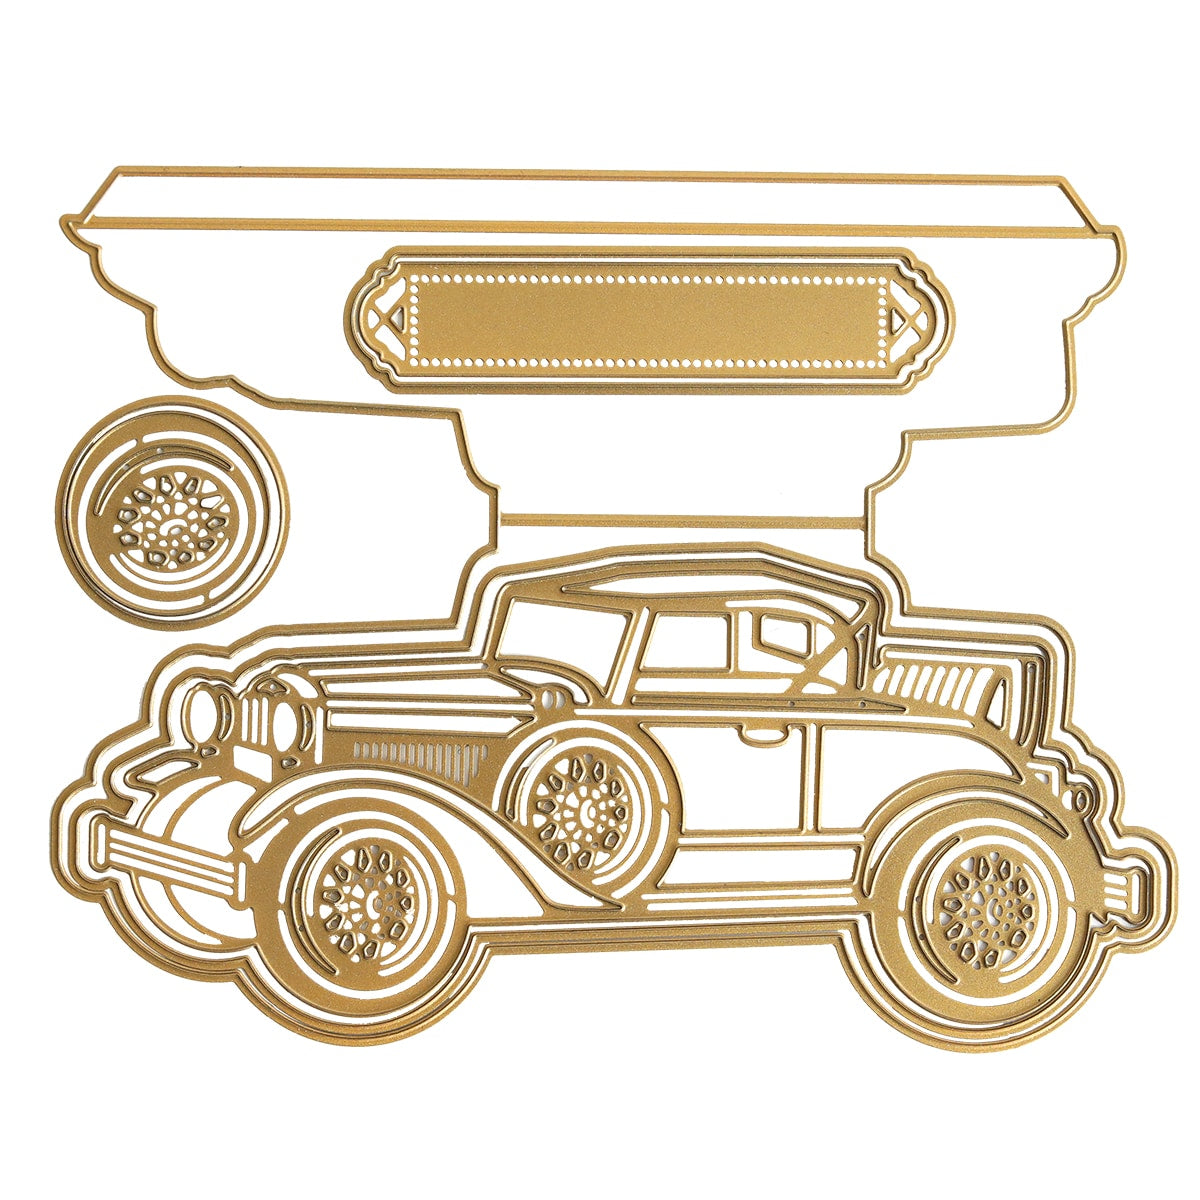 A drawing of a Classic Car Slimline Easel Dies with a gold finish.